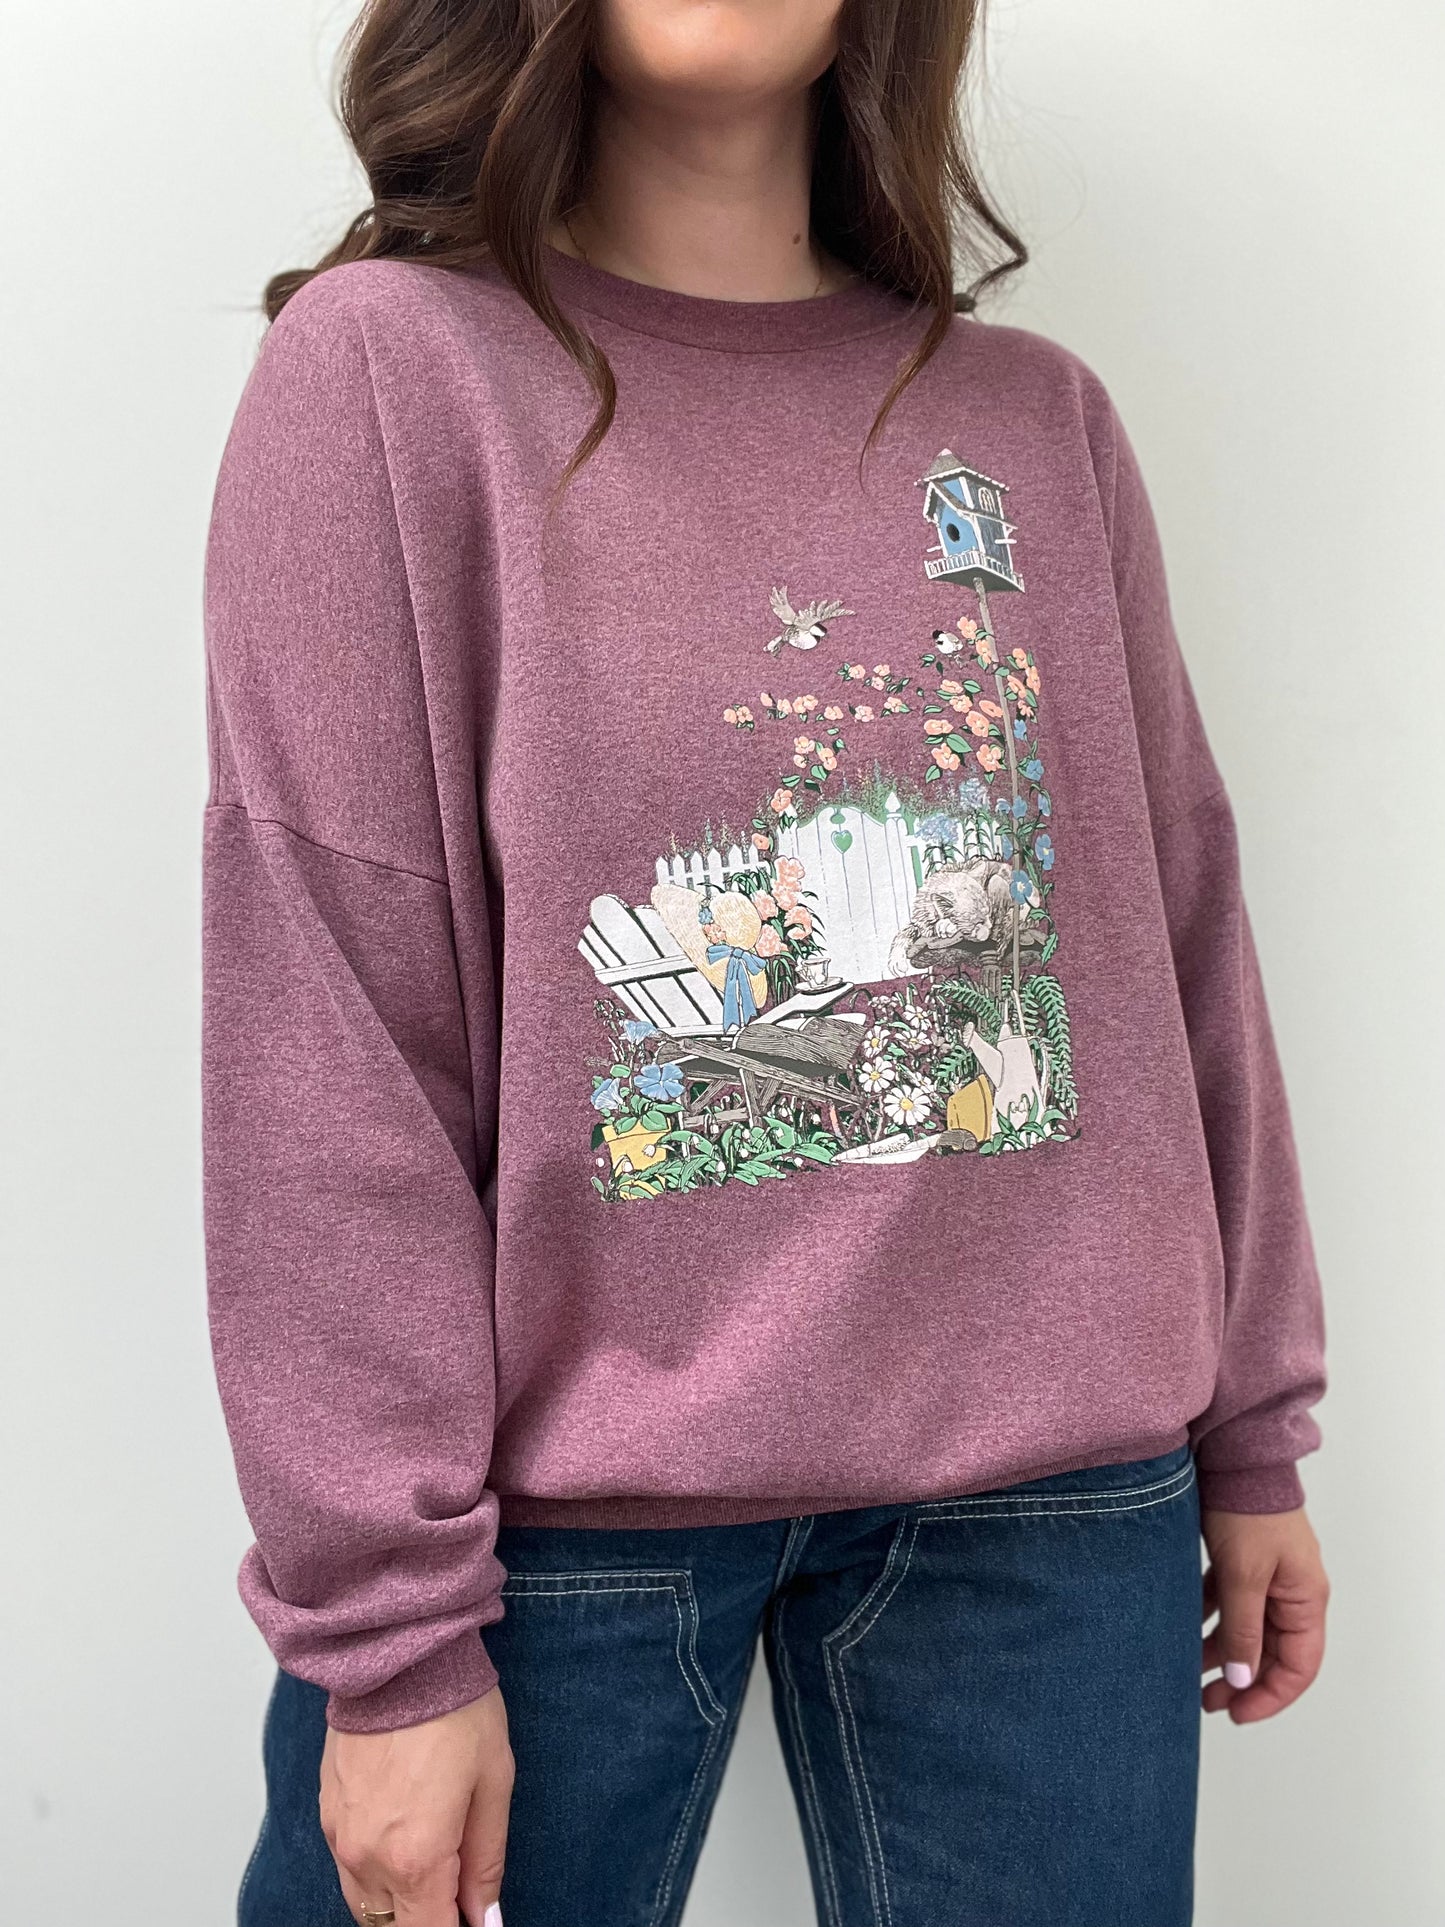 Cottagecore Cats and Florals Sweater - XL